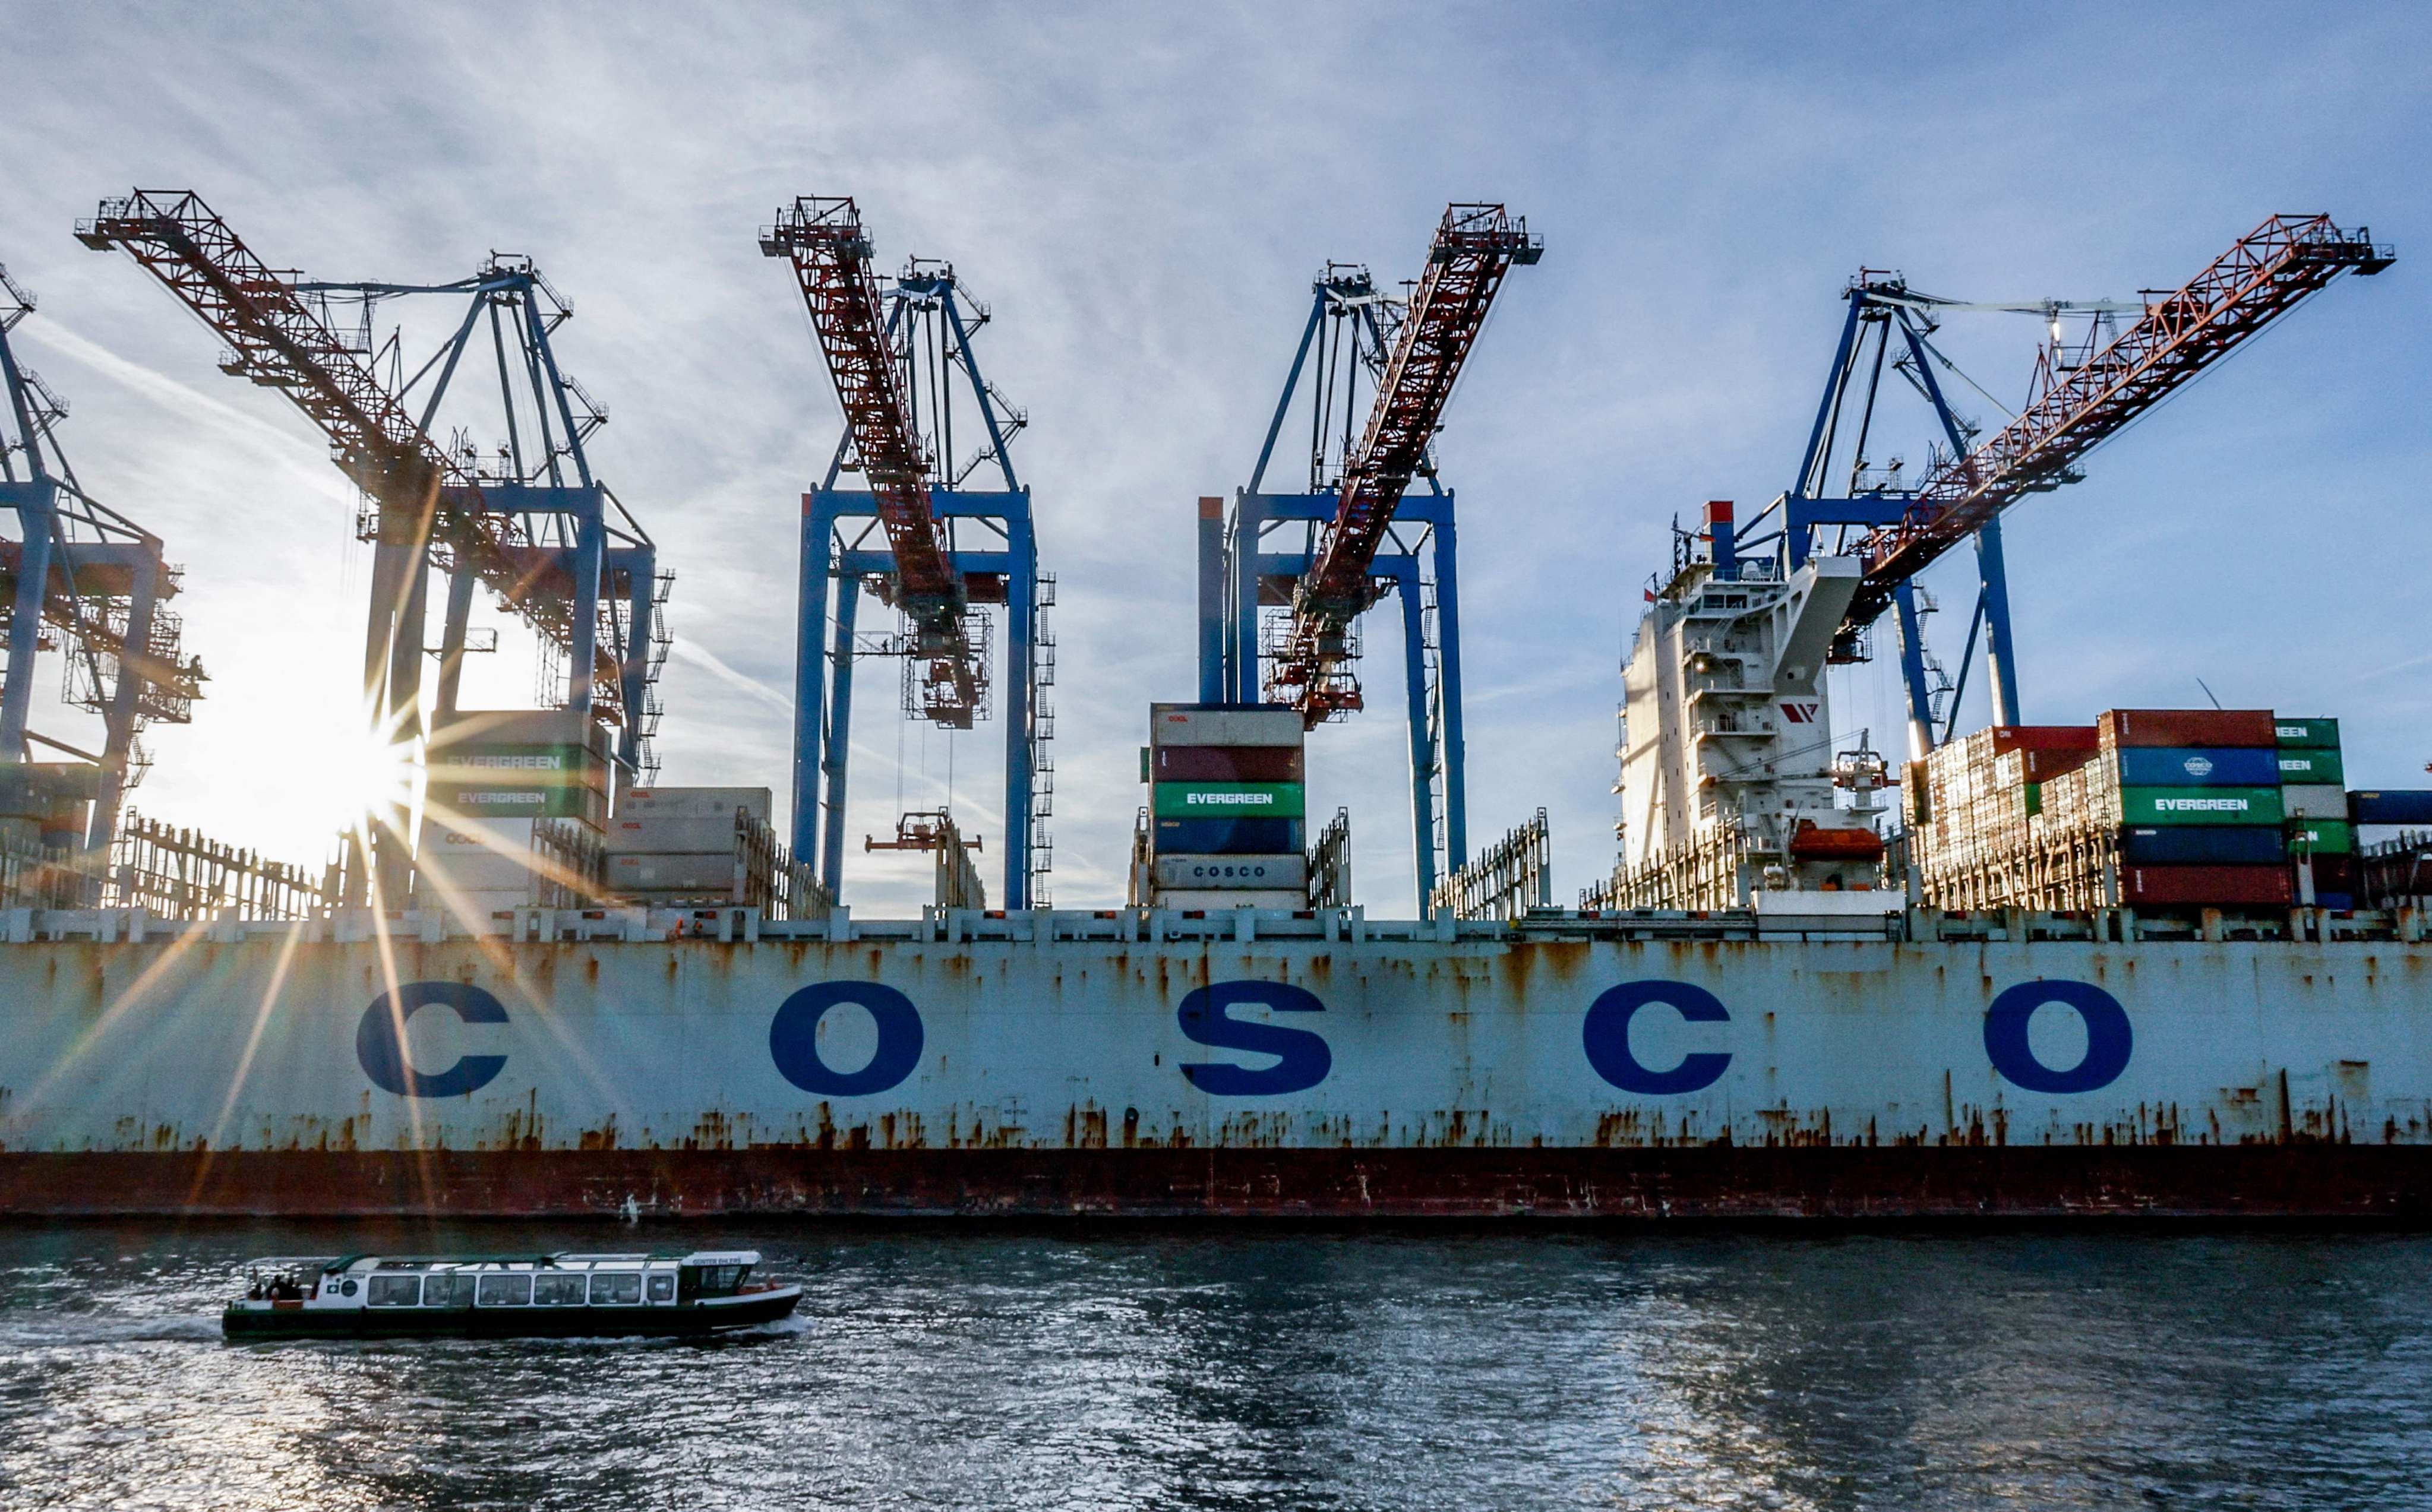 The container ship ‘Cosco Pride’ of China is unloaded at the Tollerort Terminal in Hamburg, northern Germany. Photo: AFP